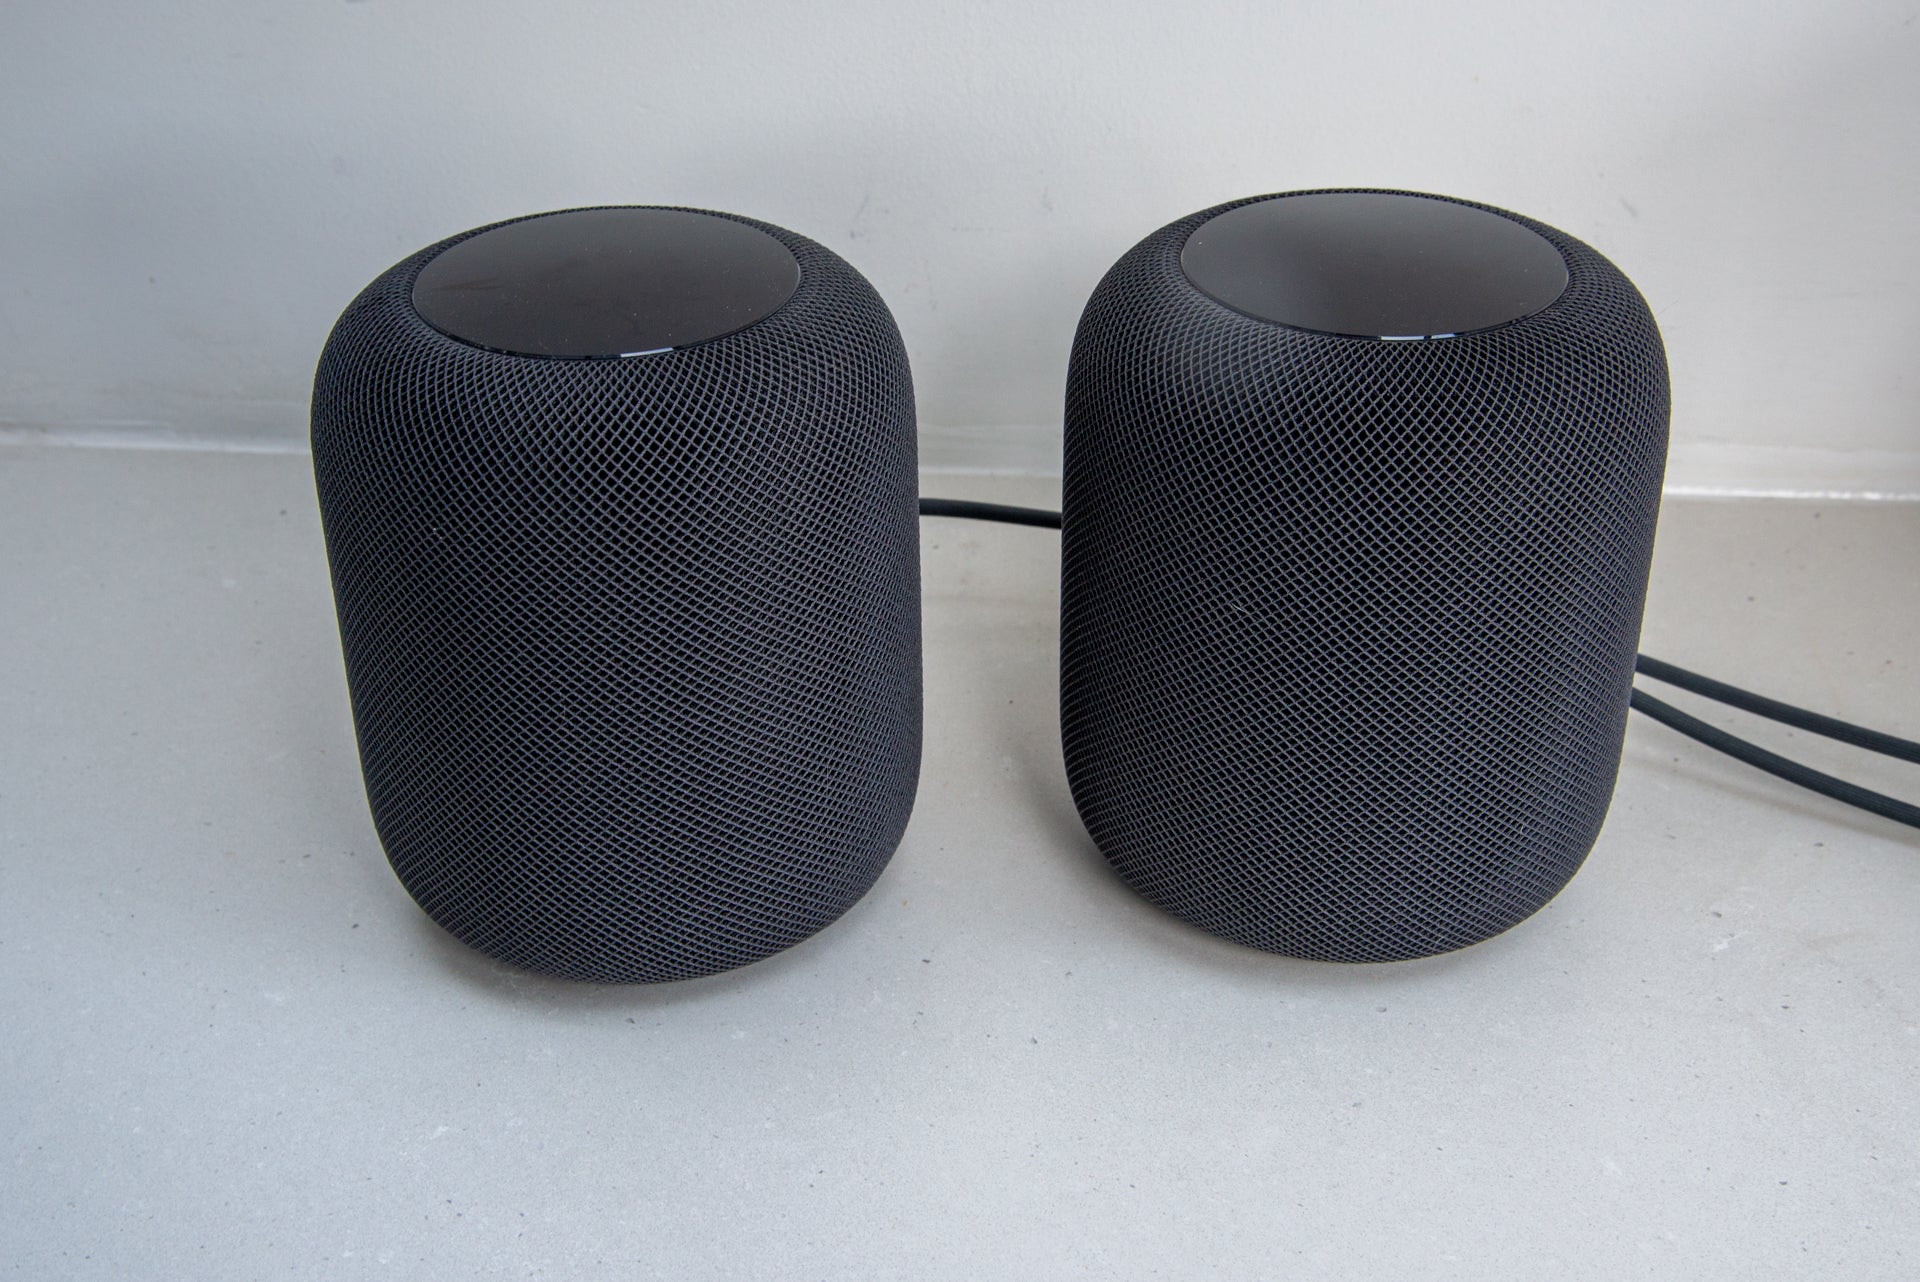 Apple HomePod Suddenly Becomes a Great Streaming Option for Millions